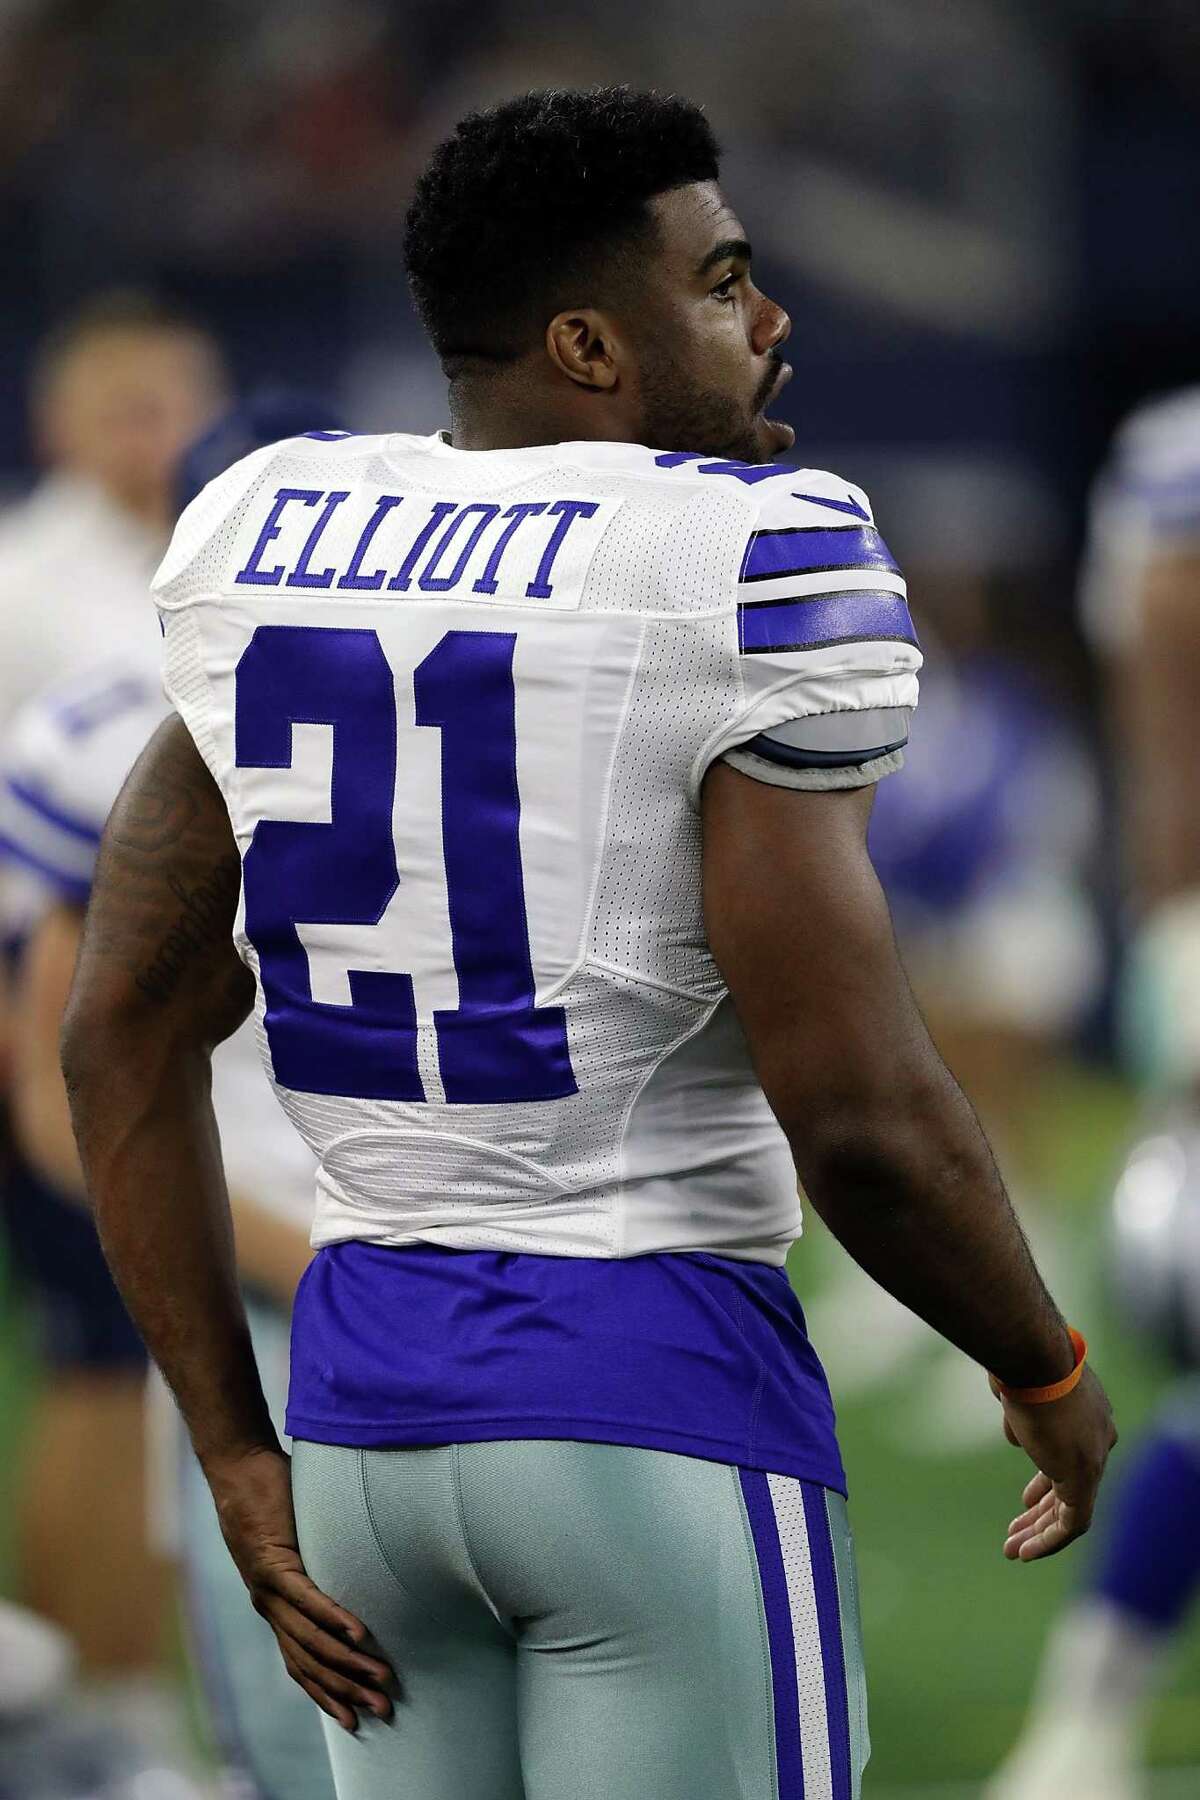 Ezekiel Elliott of the Dallas Cowboys on the sidelines during a preseason game against the Houston Texans at AT&T Stadium on Sept. 1, 2016 in Arlington.